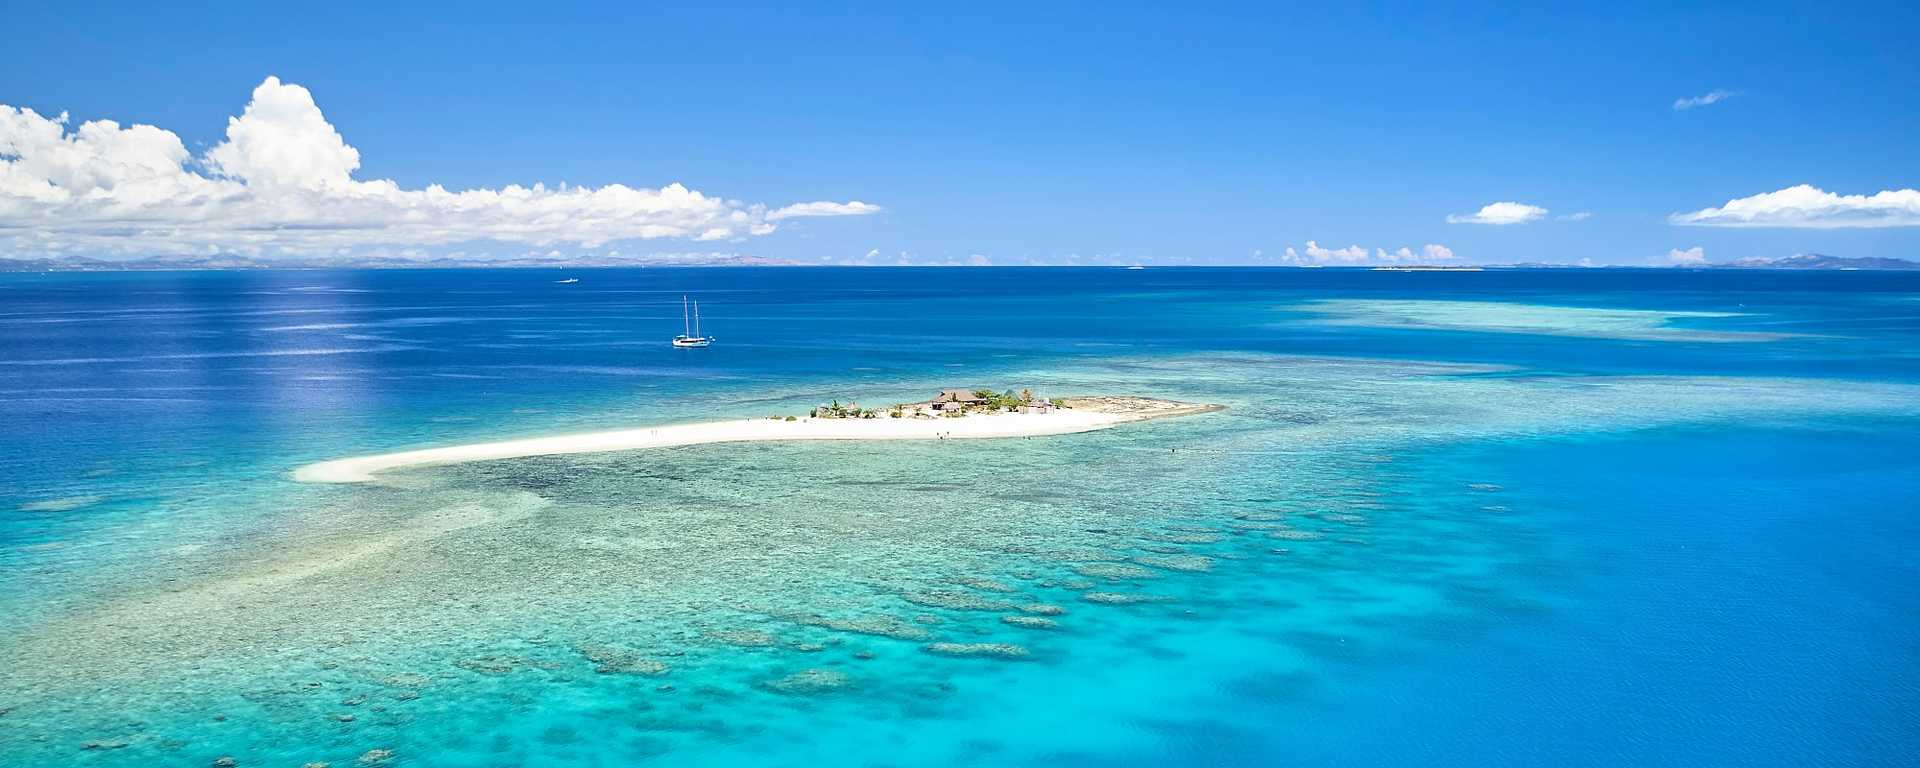 Romantic remote island with coral reef in the Fijian Island